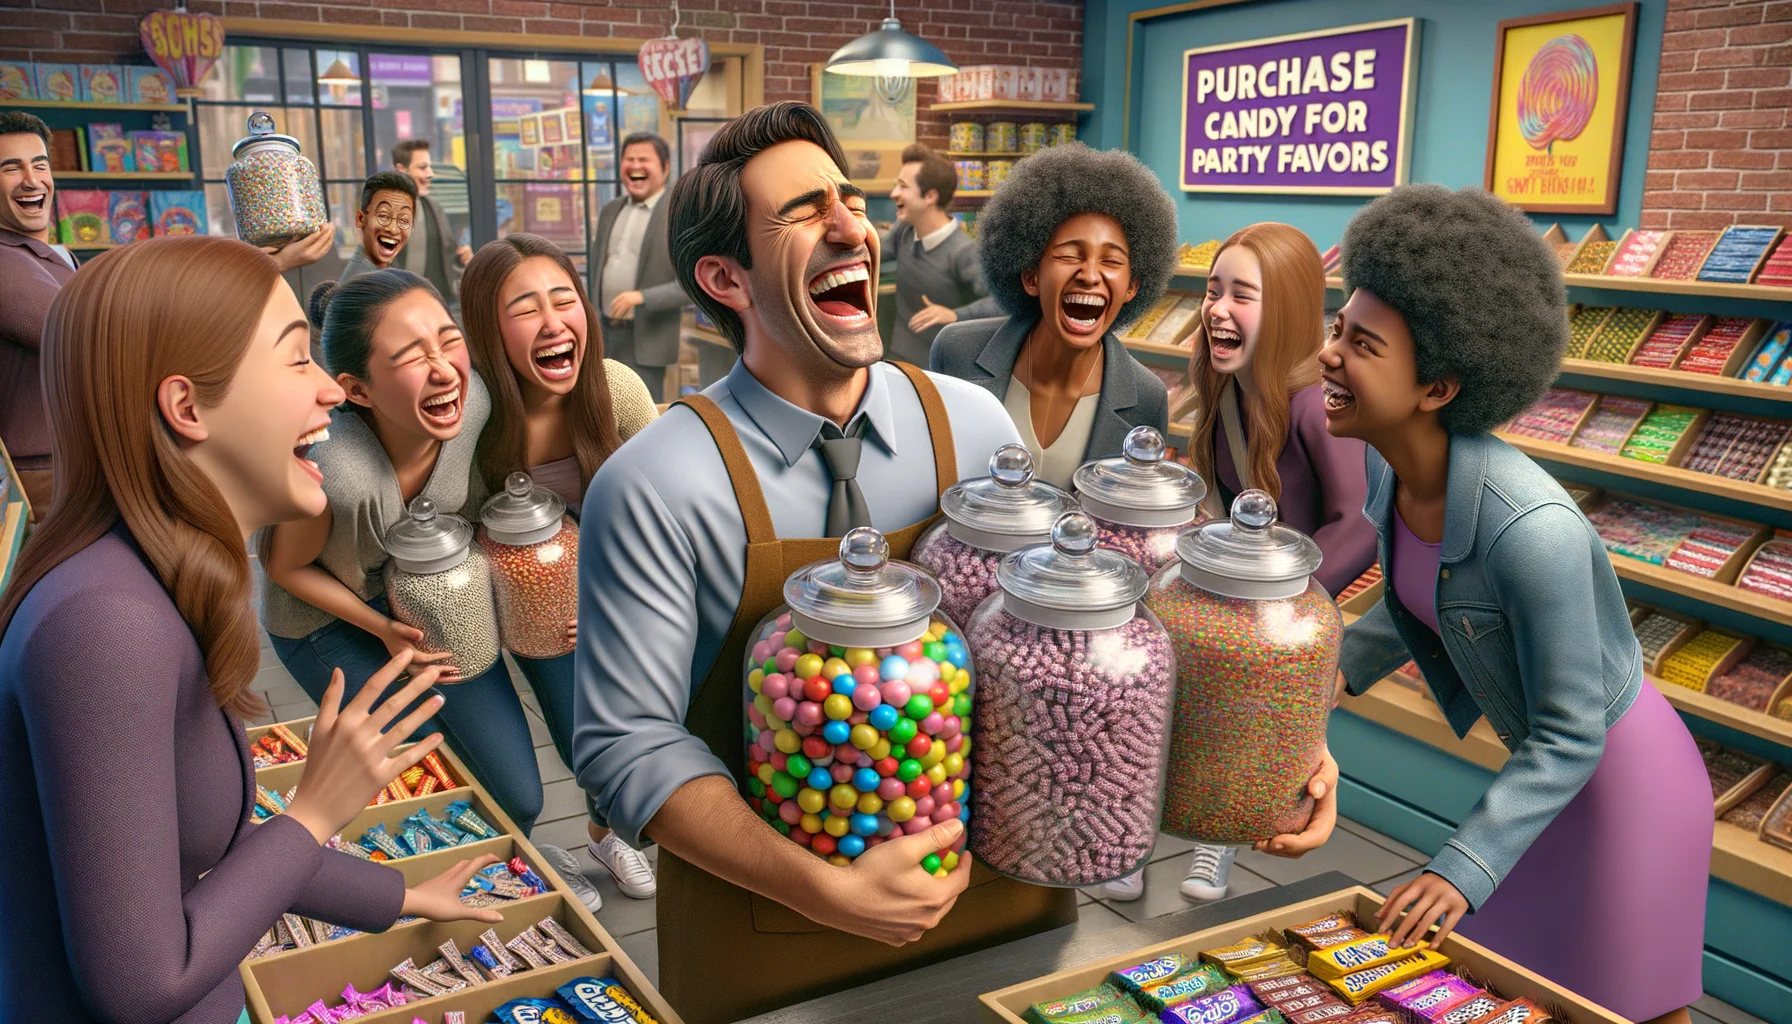 Create a hilariously engaging scene set in a bustling candy store. Everyone's laughing, from a middle-aged Hispanic shopkeeper restocking colorful gumballs in multiple glass jars at one corner of the shop to a Caucasian male customer in his 30s, his arms full of various wrapped candies he's magically balancing, clearly overestimating his own carrying capacity. Let’s also see a group of teenage girls, one Black, one Middle-Eastern, and one South Asian, chattering excitedly, picking candy favor bags, unable to contain their bubbling enthusiasm. In the background, a display sign reads, 'Purchase Candy for Party Favors'.